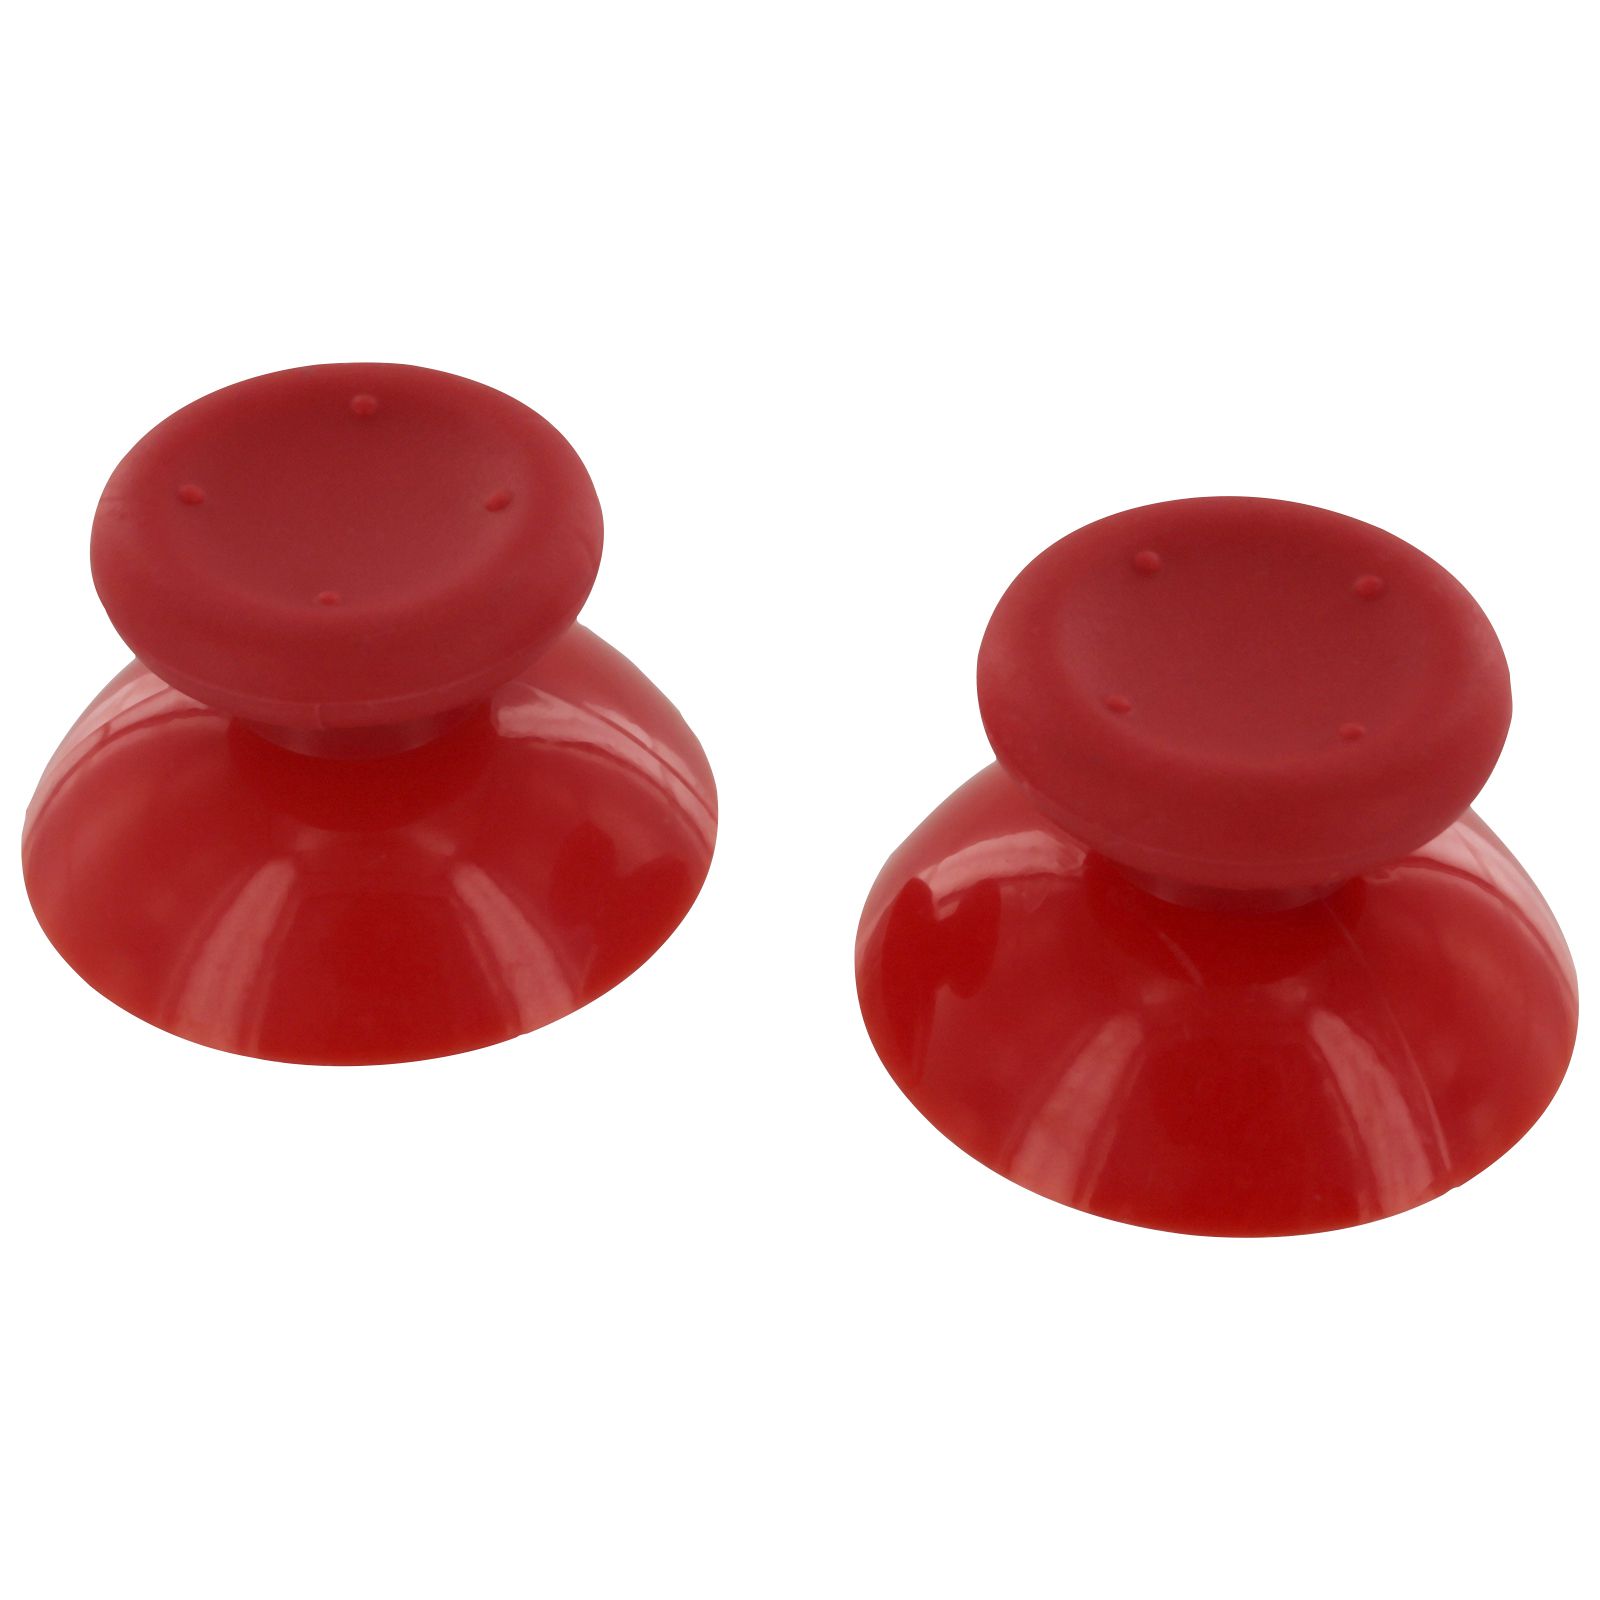 Analog Thumbsticks Plastic Red - Xbox 360 Controller